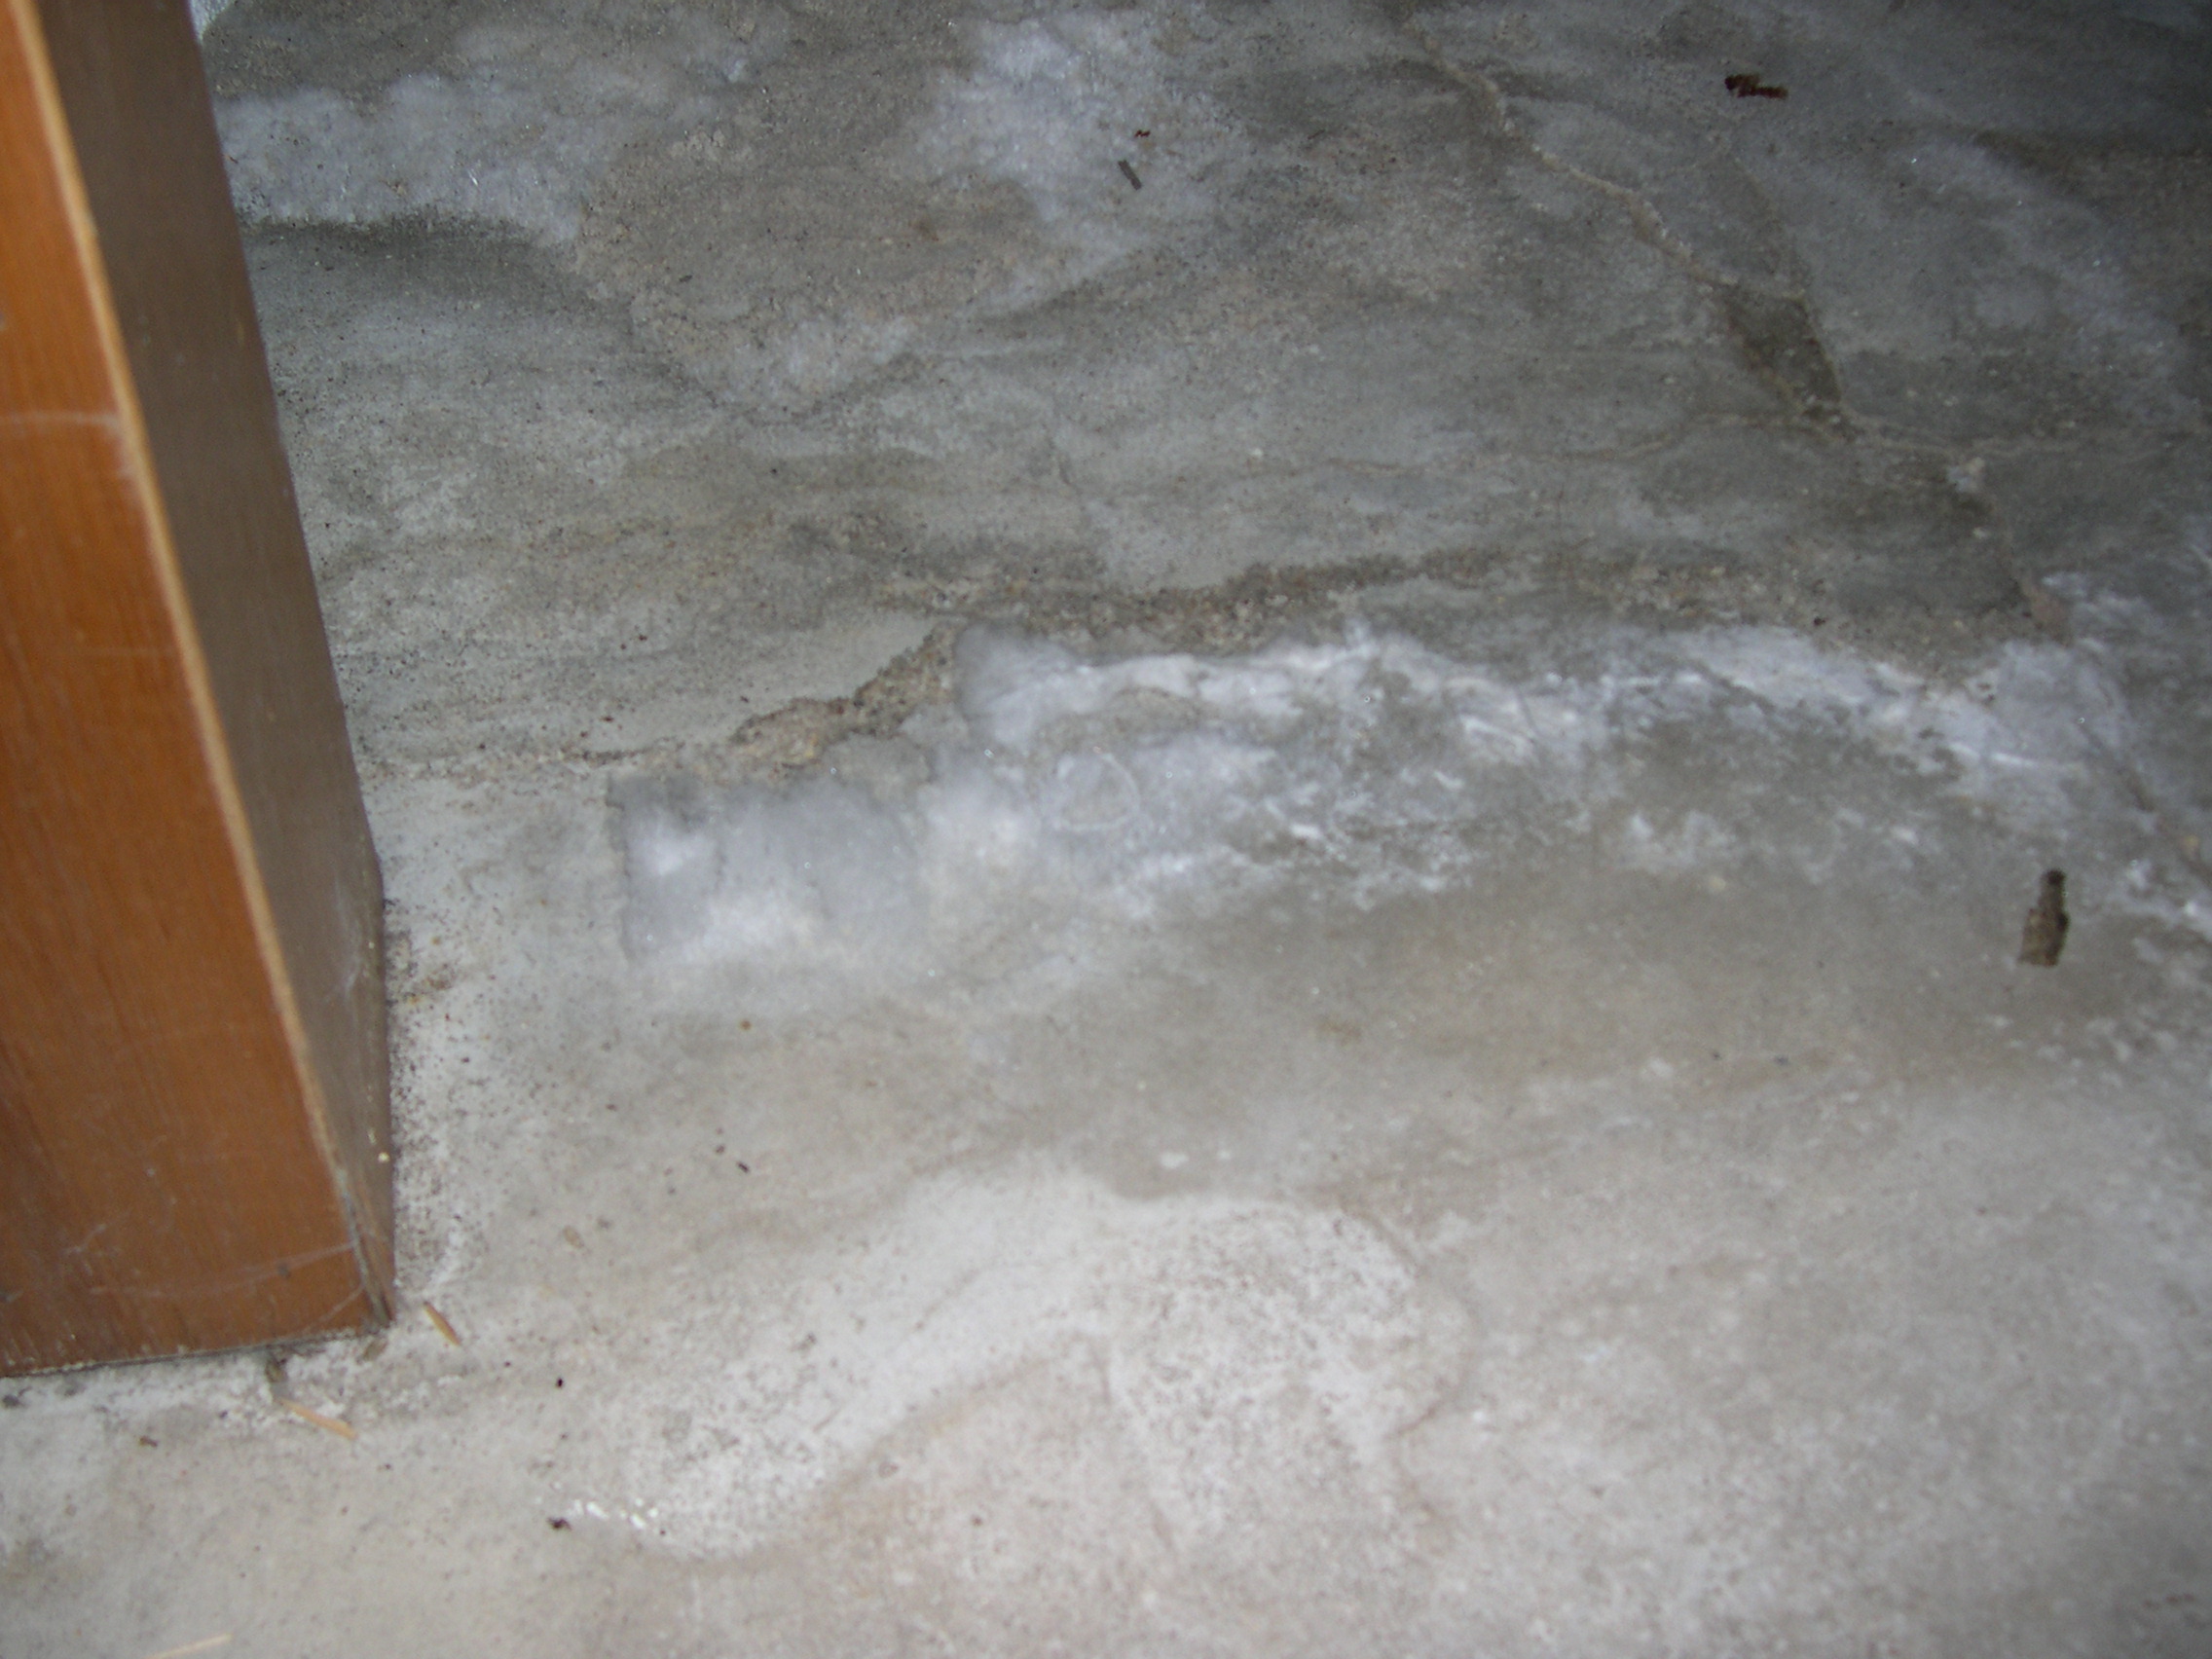 White, fluffy-looking mineral deposits are left behind as water evaporates from basement floors and walls.